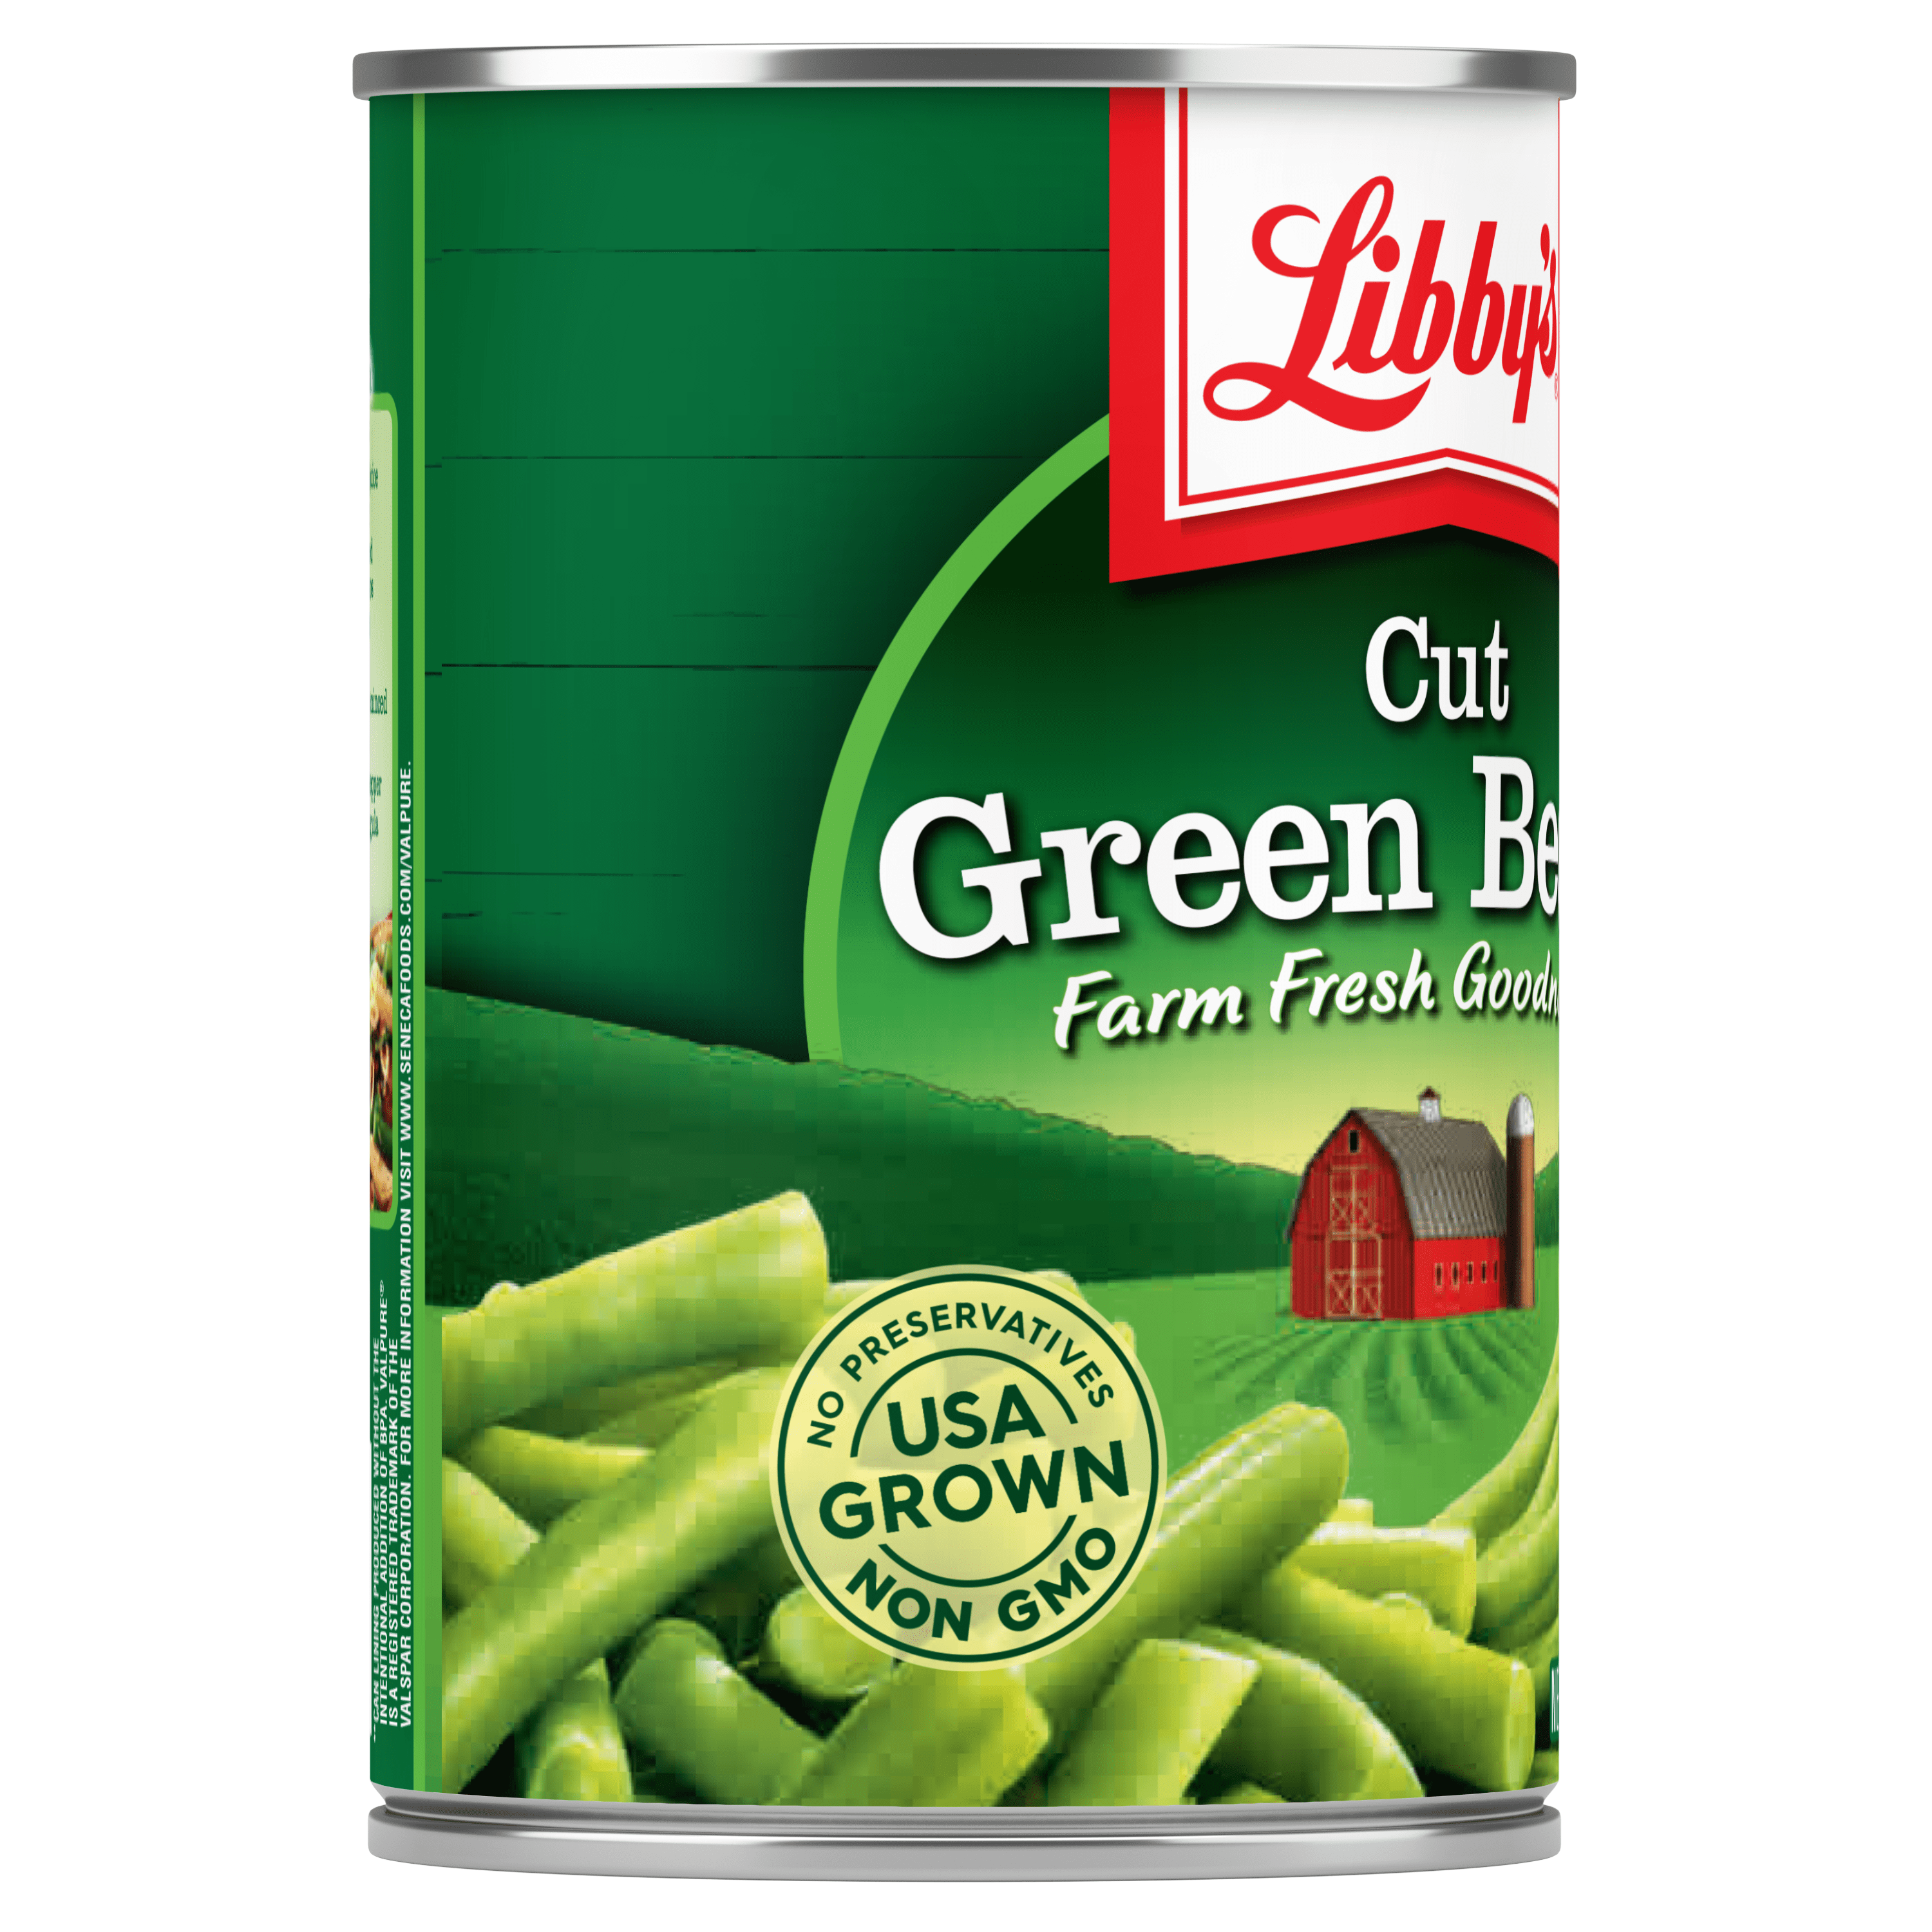 Libby's Cut Green Beans, 14.5 oz. Can, Canned Green Beans left panel of label showing USA Grown, No Preservatives and Non GMO information